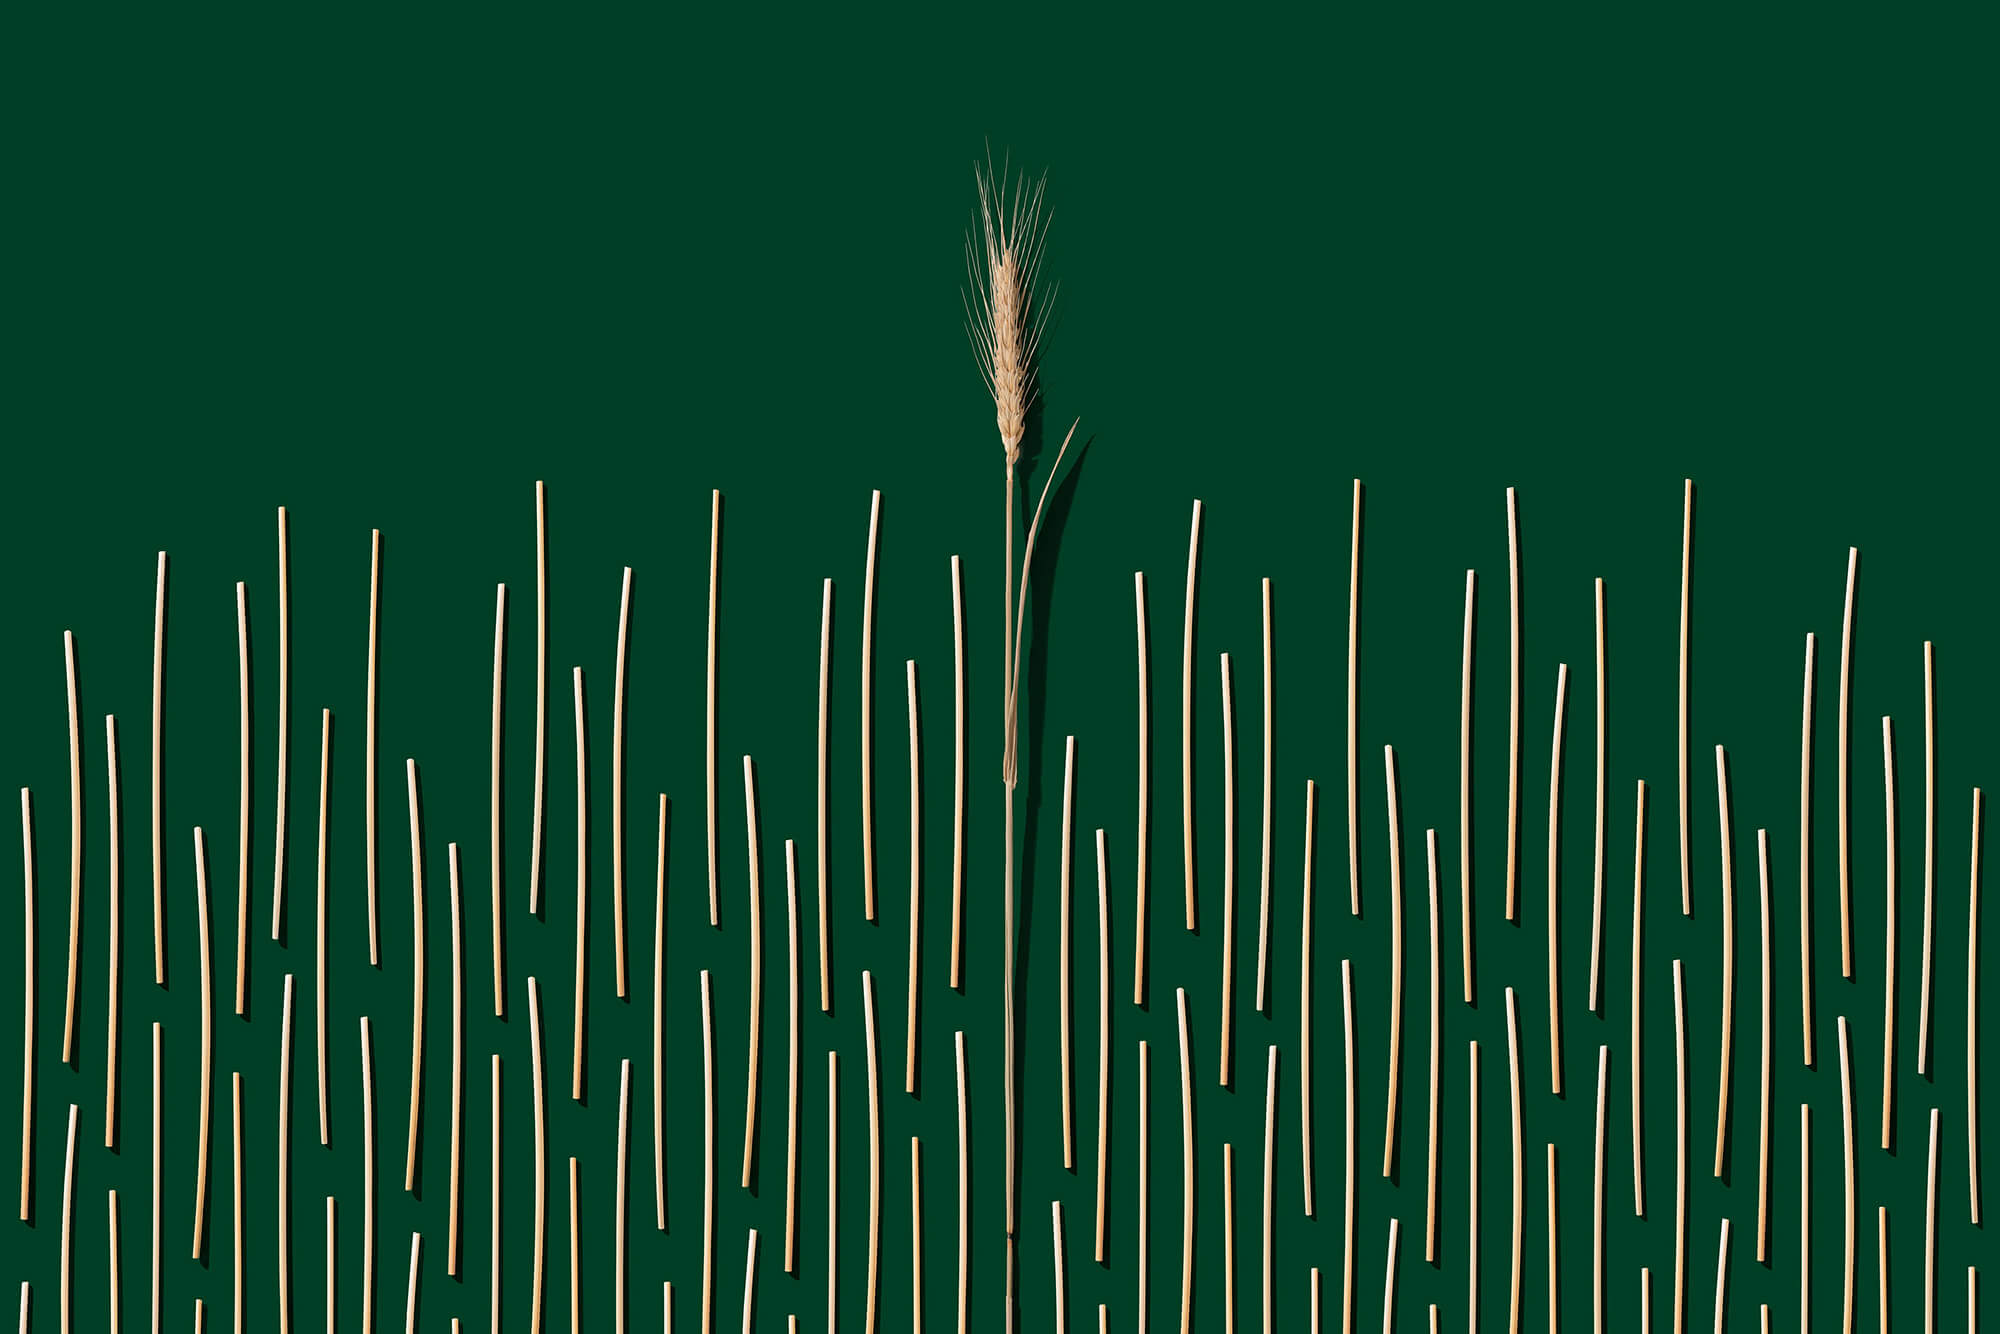 biodegradable-organic-drinking-straws-made-of-wheat-straws-on-dark-green-background-environmental-conservation-zero-waste-and-upcycling-concept